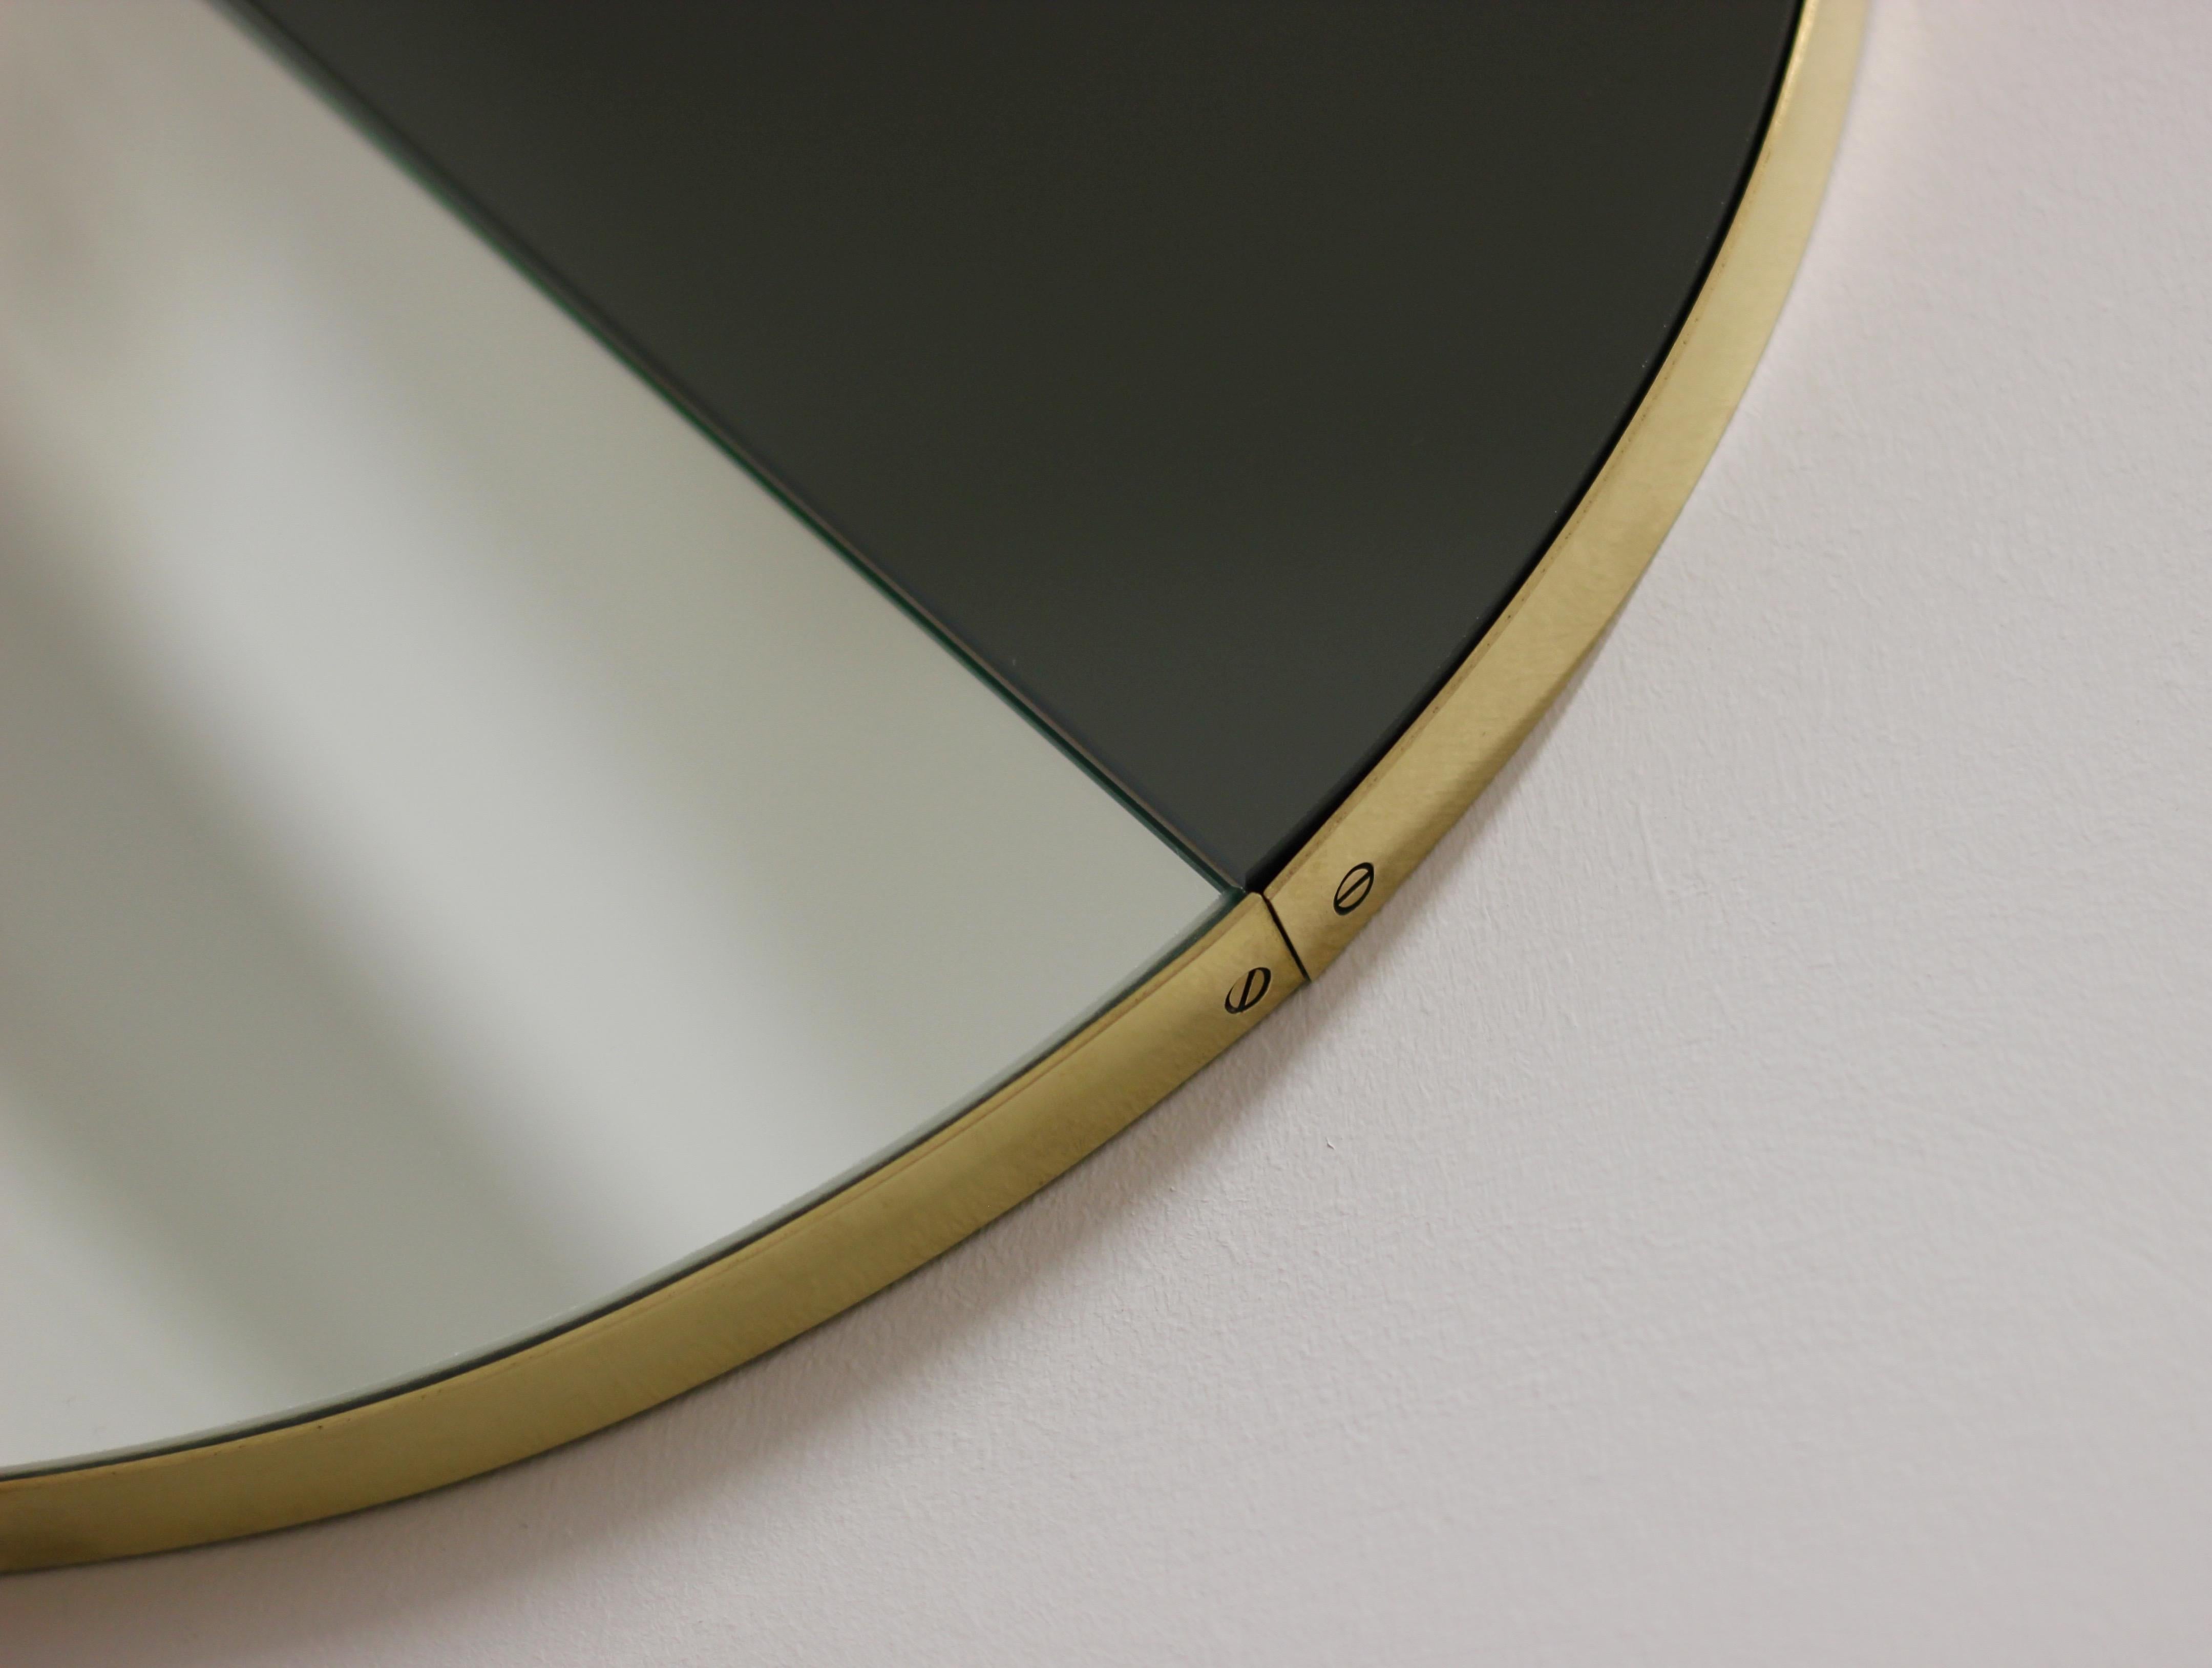 Orbis Dualis Mixed Tint Contemporary Circular Mirror with Brass Frame, Small For Sale 1